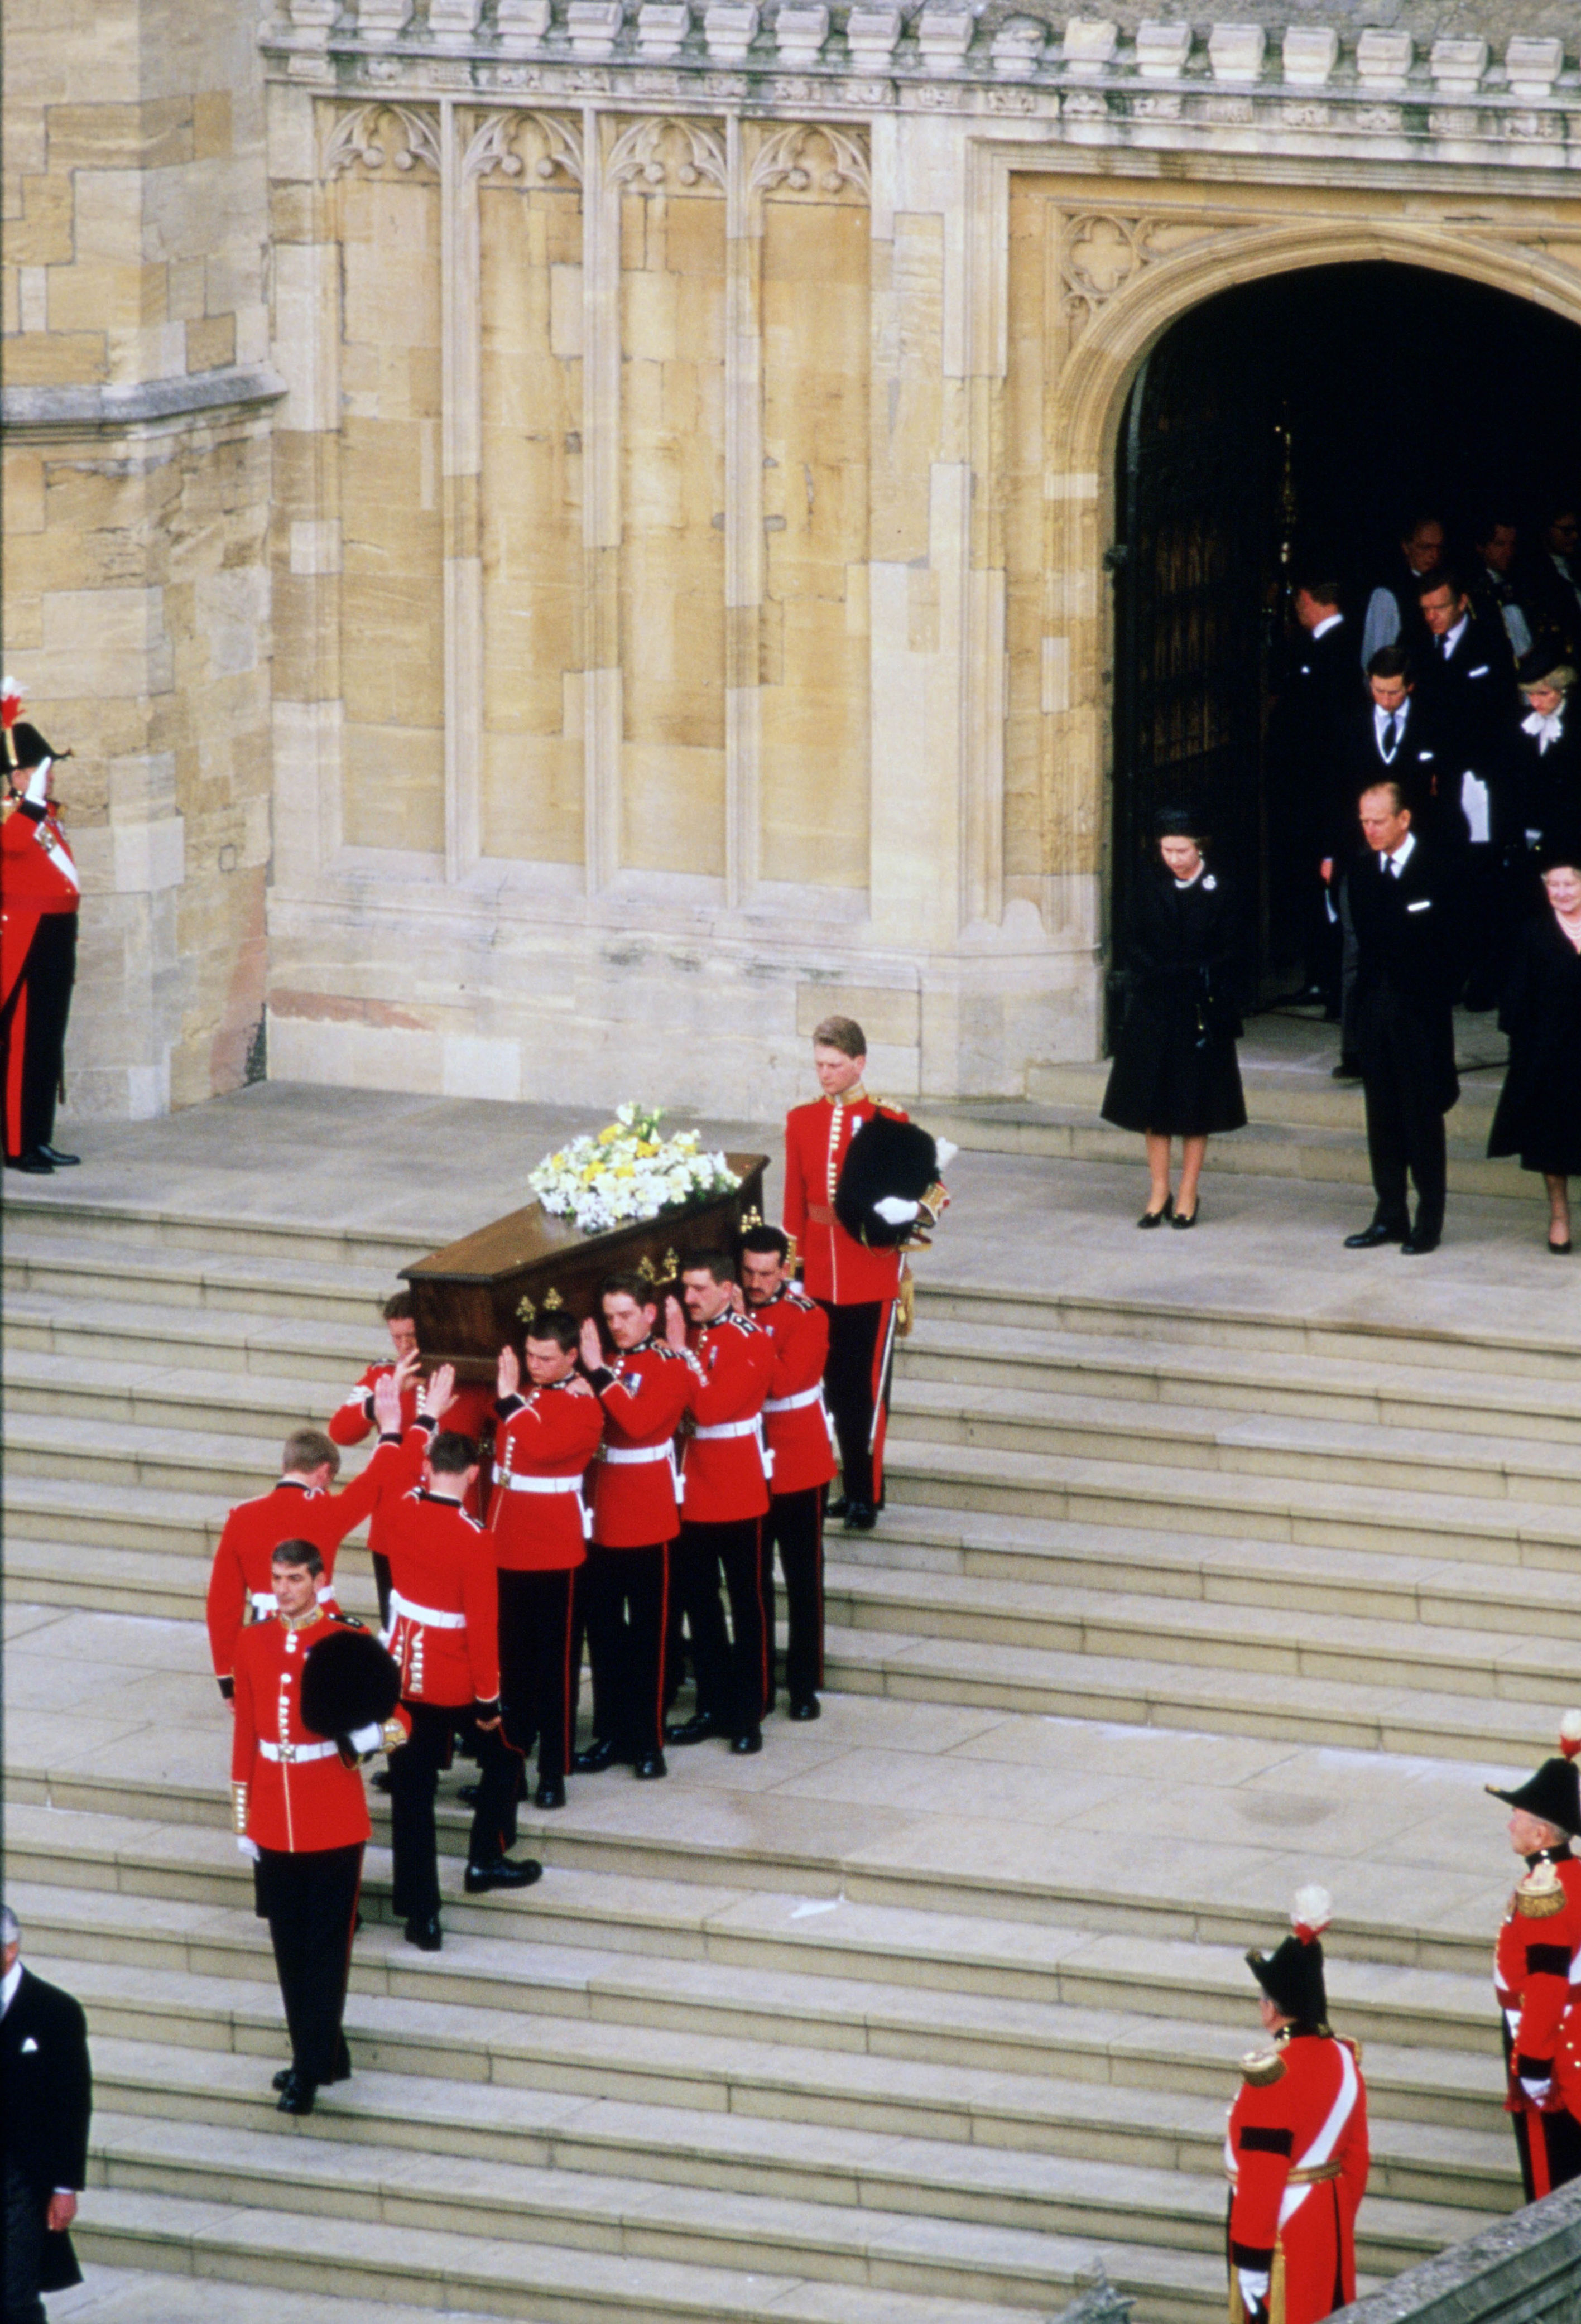 <p>Queen Elizabeth II, Prince Philip, Prince Charles (now Kings Charles III) and Princess Diana are seen on the steps of St. George's Chapel at Windsor Castle during the April 29, 1986, funeral of the Duchess of Windsor -- who's perhaps better known as the former Wallis Simpson, the American widow of the Duke of Windsor, who was briefly King Edward VIII.</p>